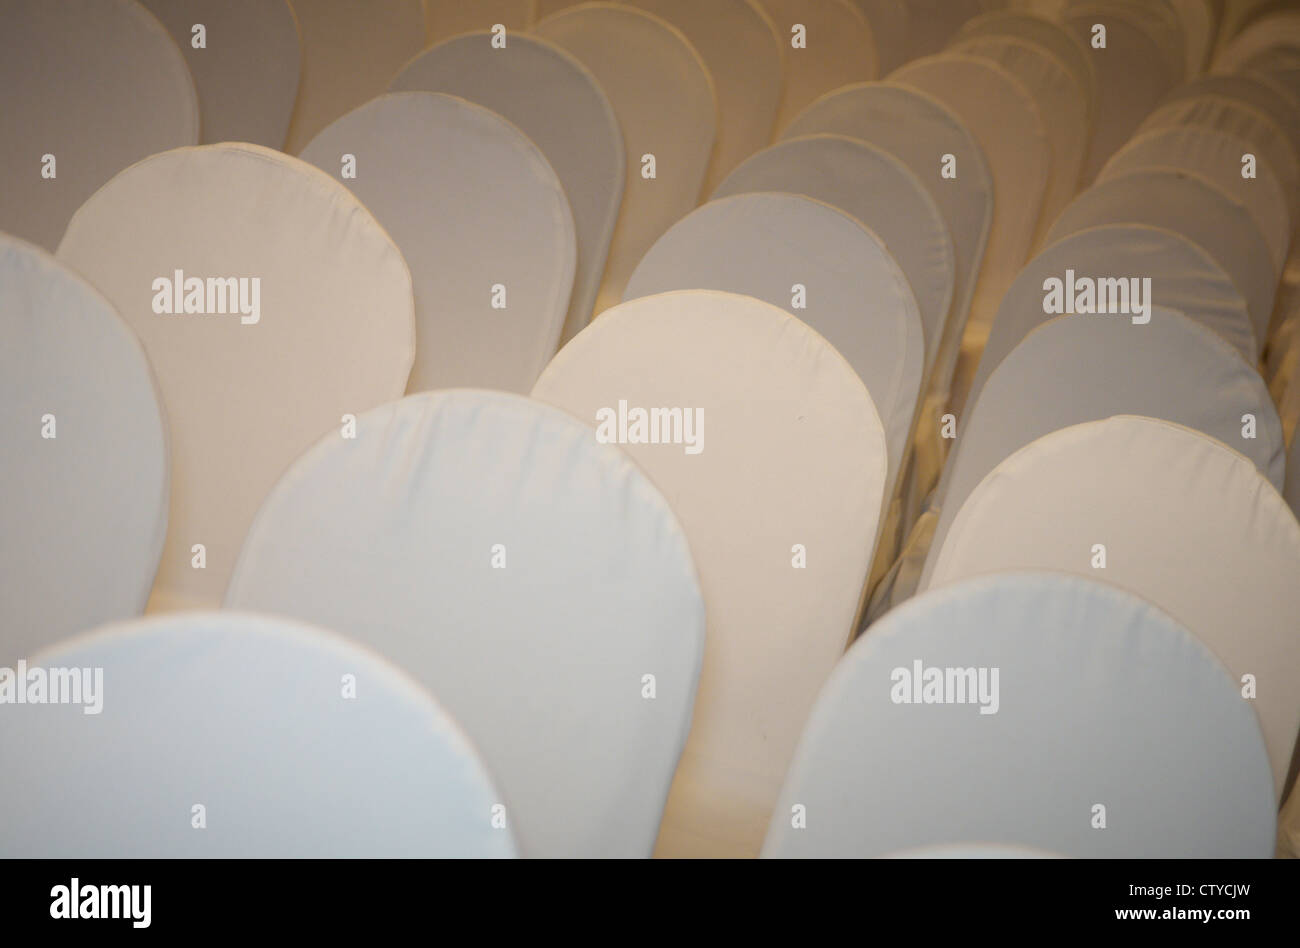 chairs lined up for a meeting Stock Photo